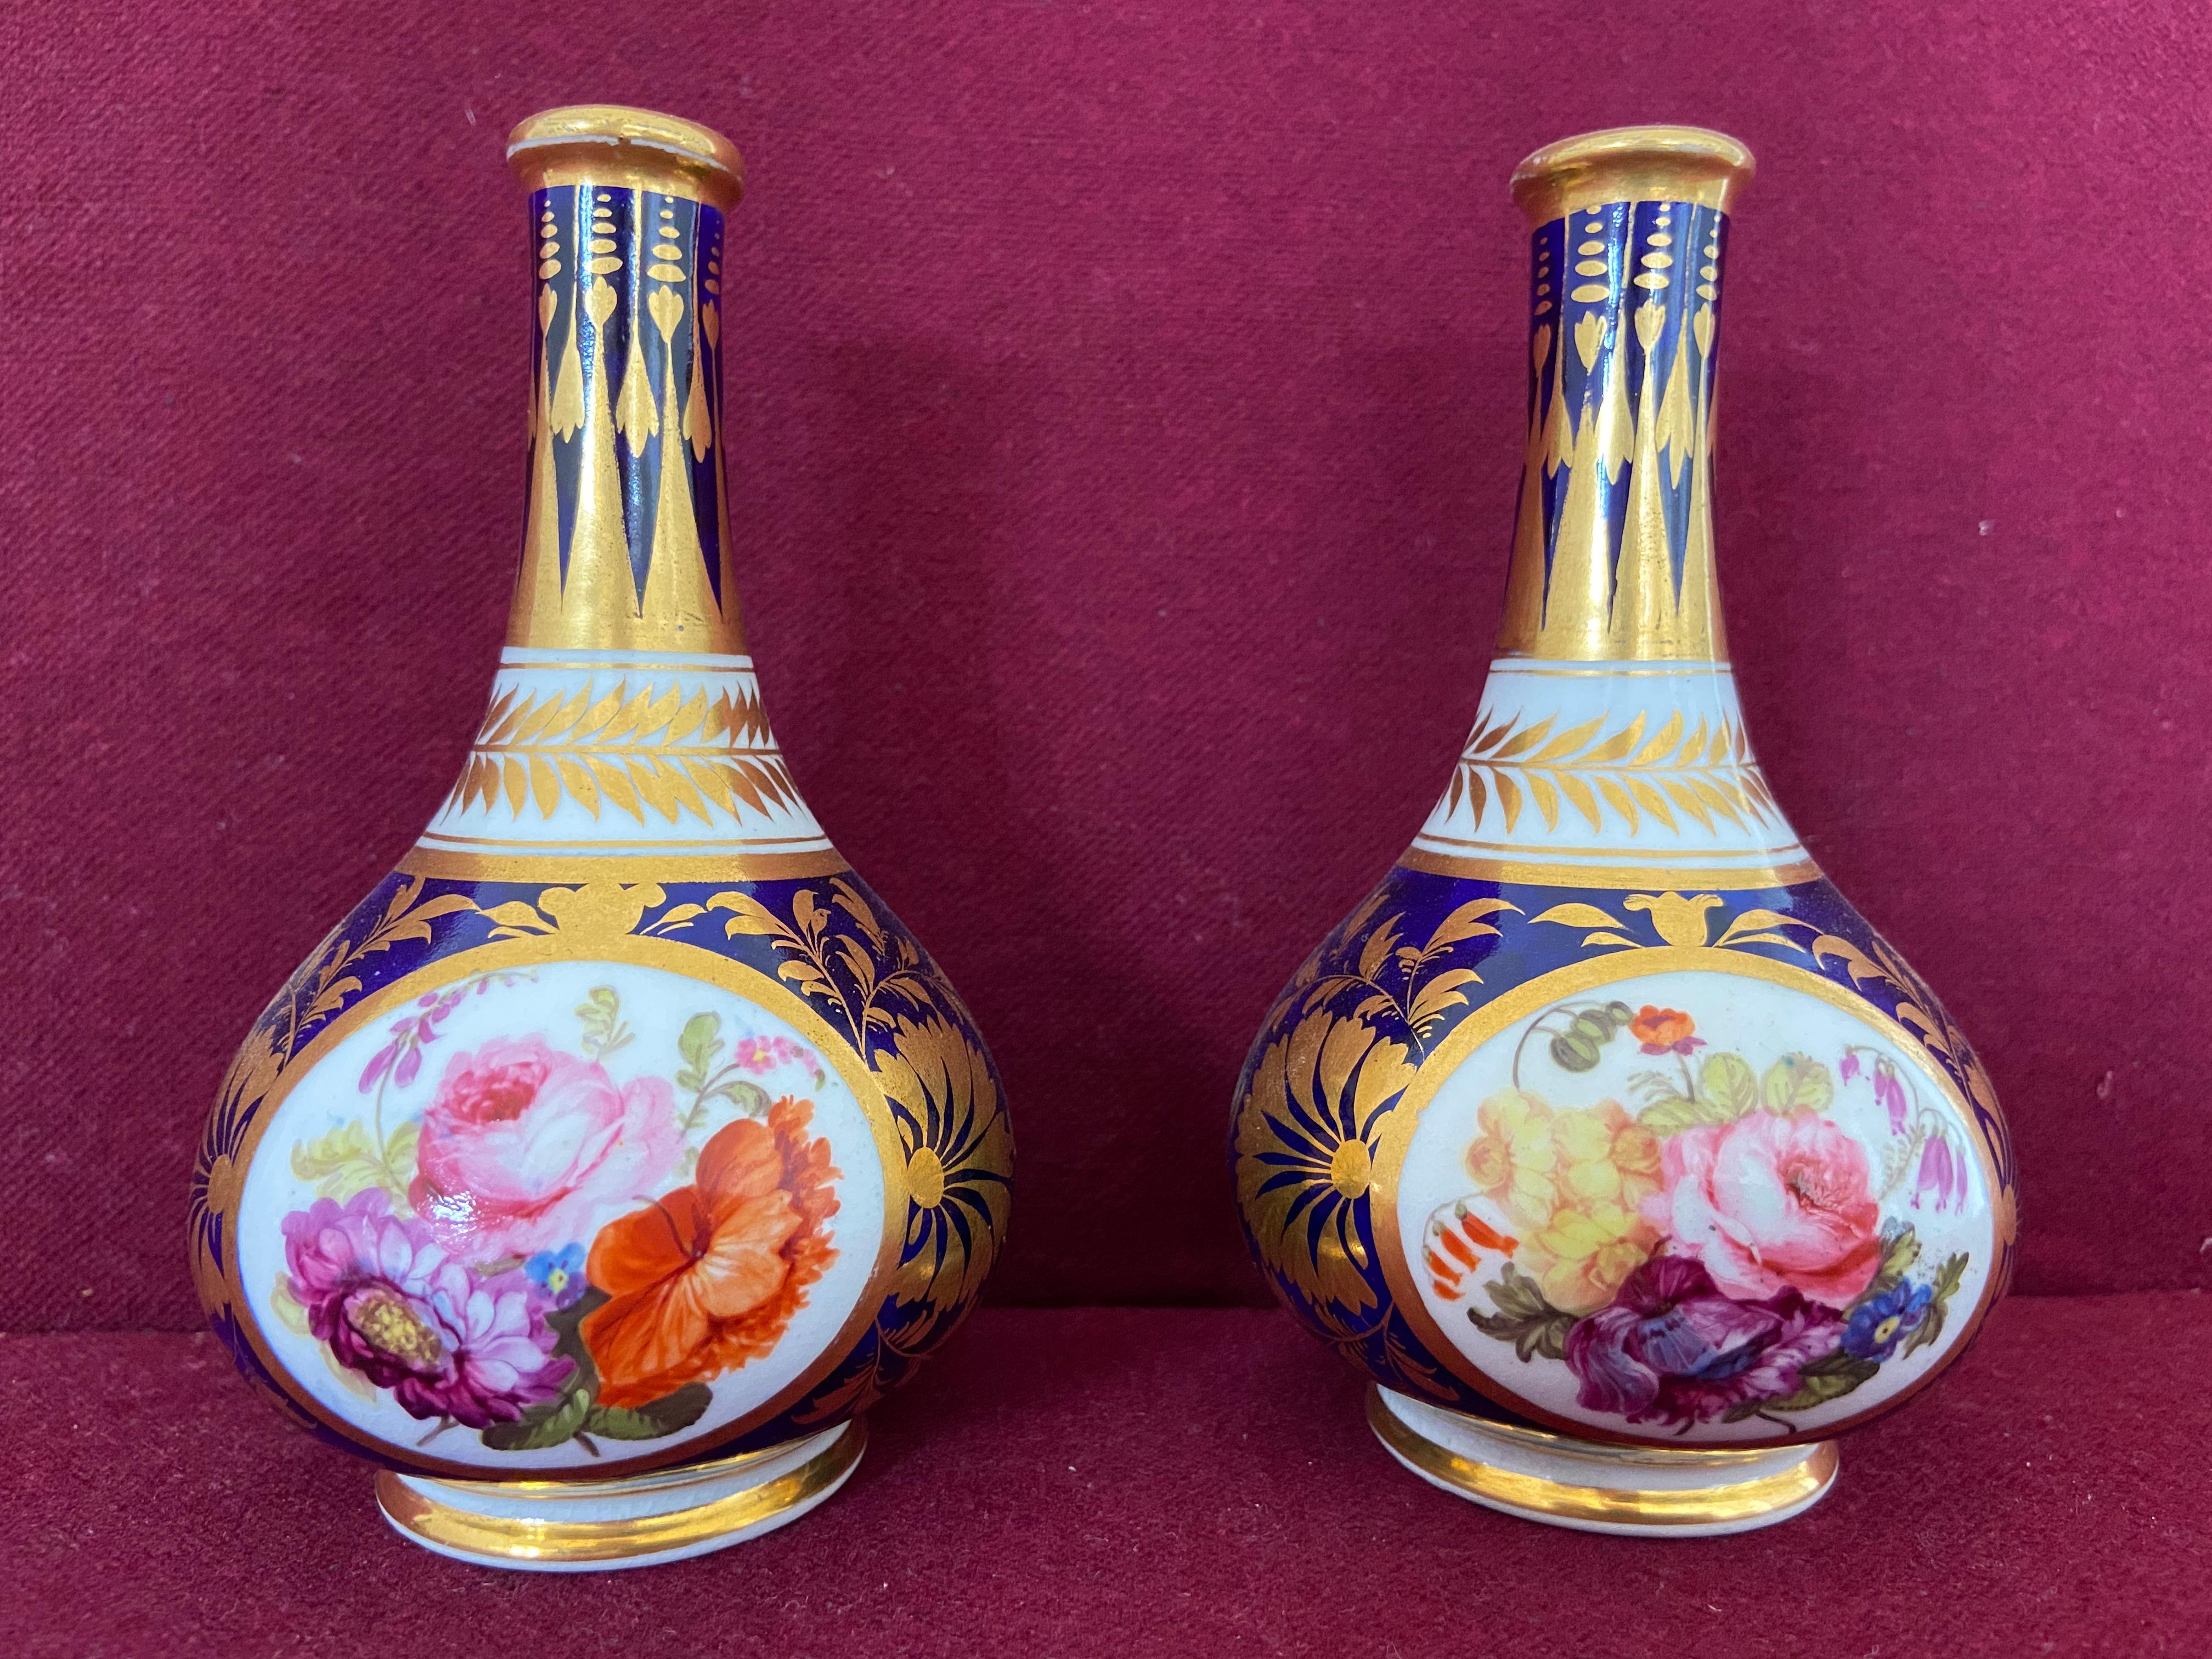 A fine pair of Derby porcelain scent bottles c.1815. Finely decorated with flowers in a roundel reserved on rich cobalt blue ground.

Condition: Excellent.